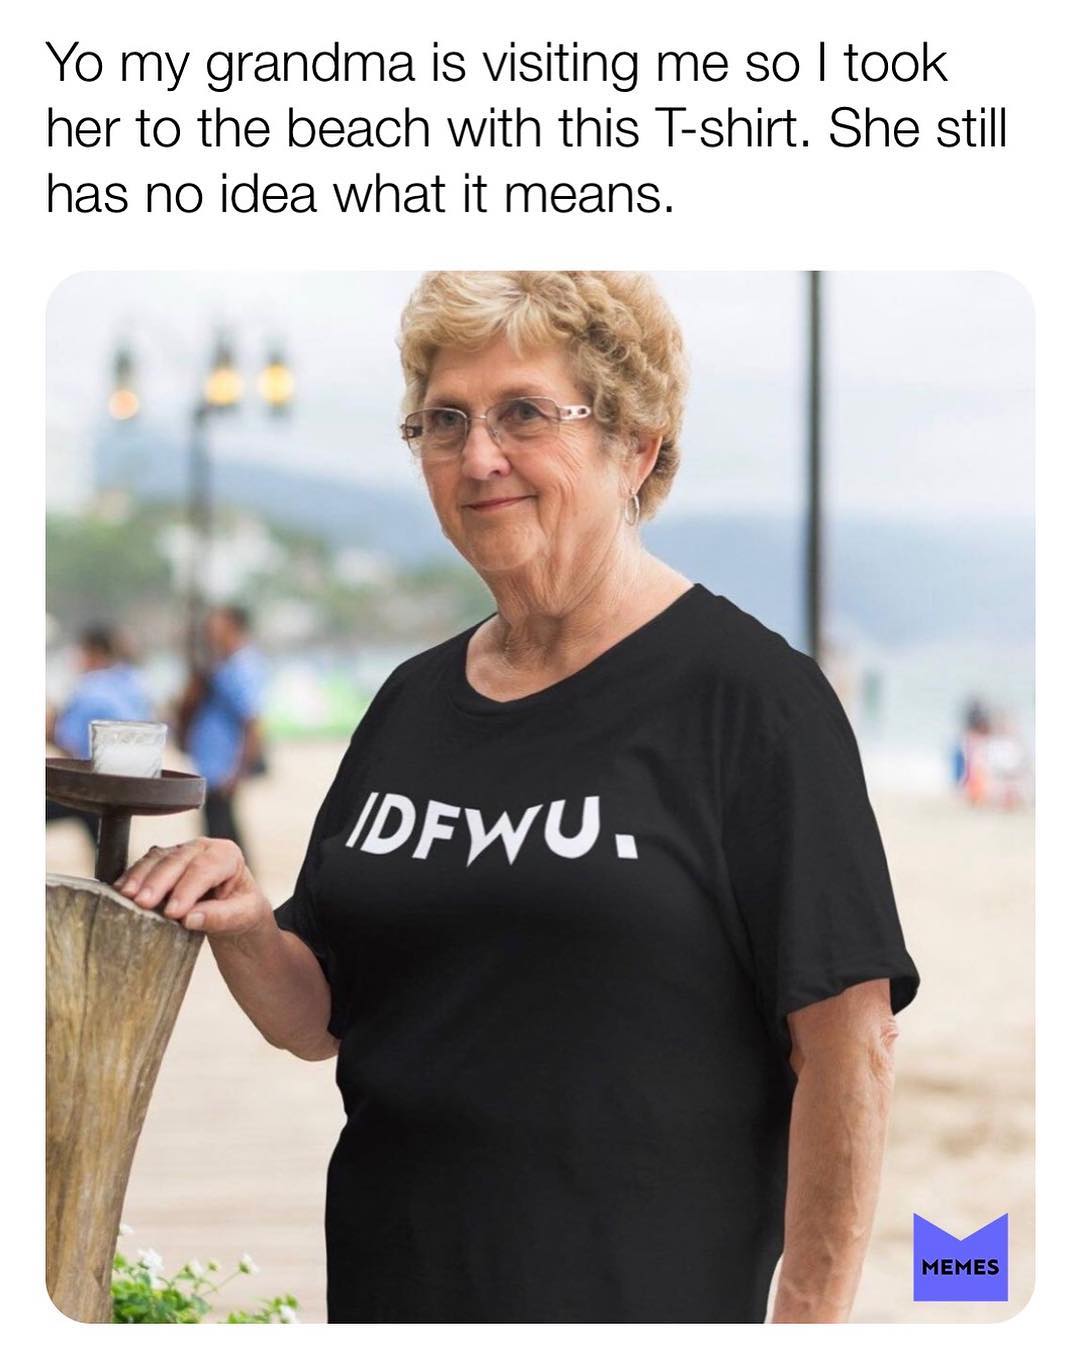 Yo my grandma is visiting me so I took her to the beach with this T-shirt. She still has no idea what it means.